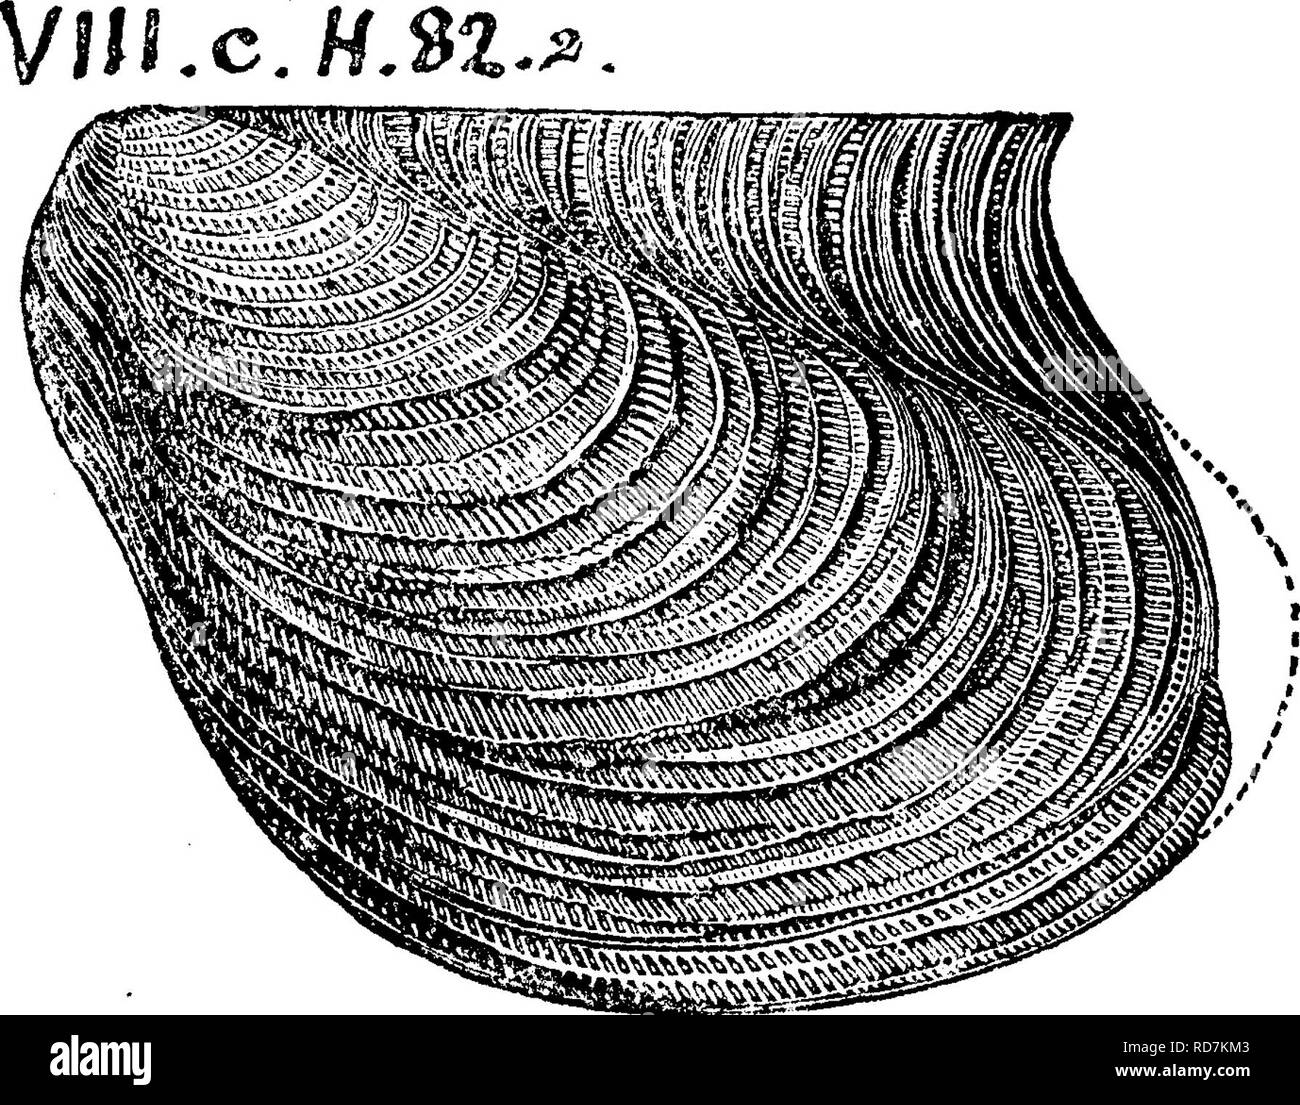 . A dictionary of the fossils of Pennsylvania and neighboring states named in the reports and catalogues of the survey ... Paleontology. 817 P'j:ero.. Rogers, Geol. Pa. 1858, fig. 657. Hamilton for- mation. Reported b y Ewing(T4,434), as found in Centre Co., Pa., in the Chemung formation. Re- ported by White (G7,76, 229) as found in Columr hia Co. Pa., Hemlock township, 250' below the top of the Hamilton for- mation, VIII g; VIII gf Pteronites gayensis, Dawson. Acadian Geology, 1868. '^'page 301, fig. 101, surface covered with rounded concentric wrinkles. Found in the Carboniferous limestone^  Stock Photo